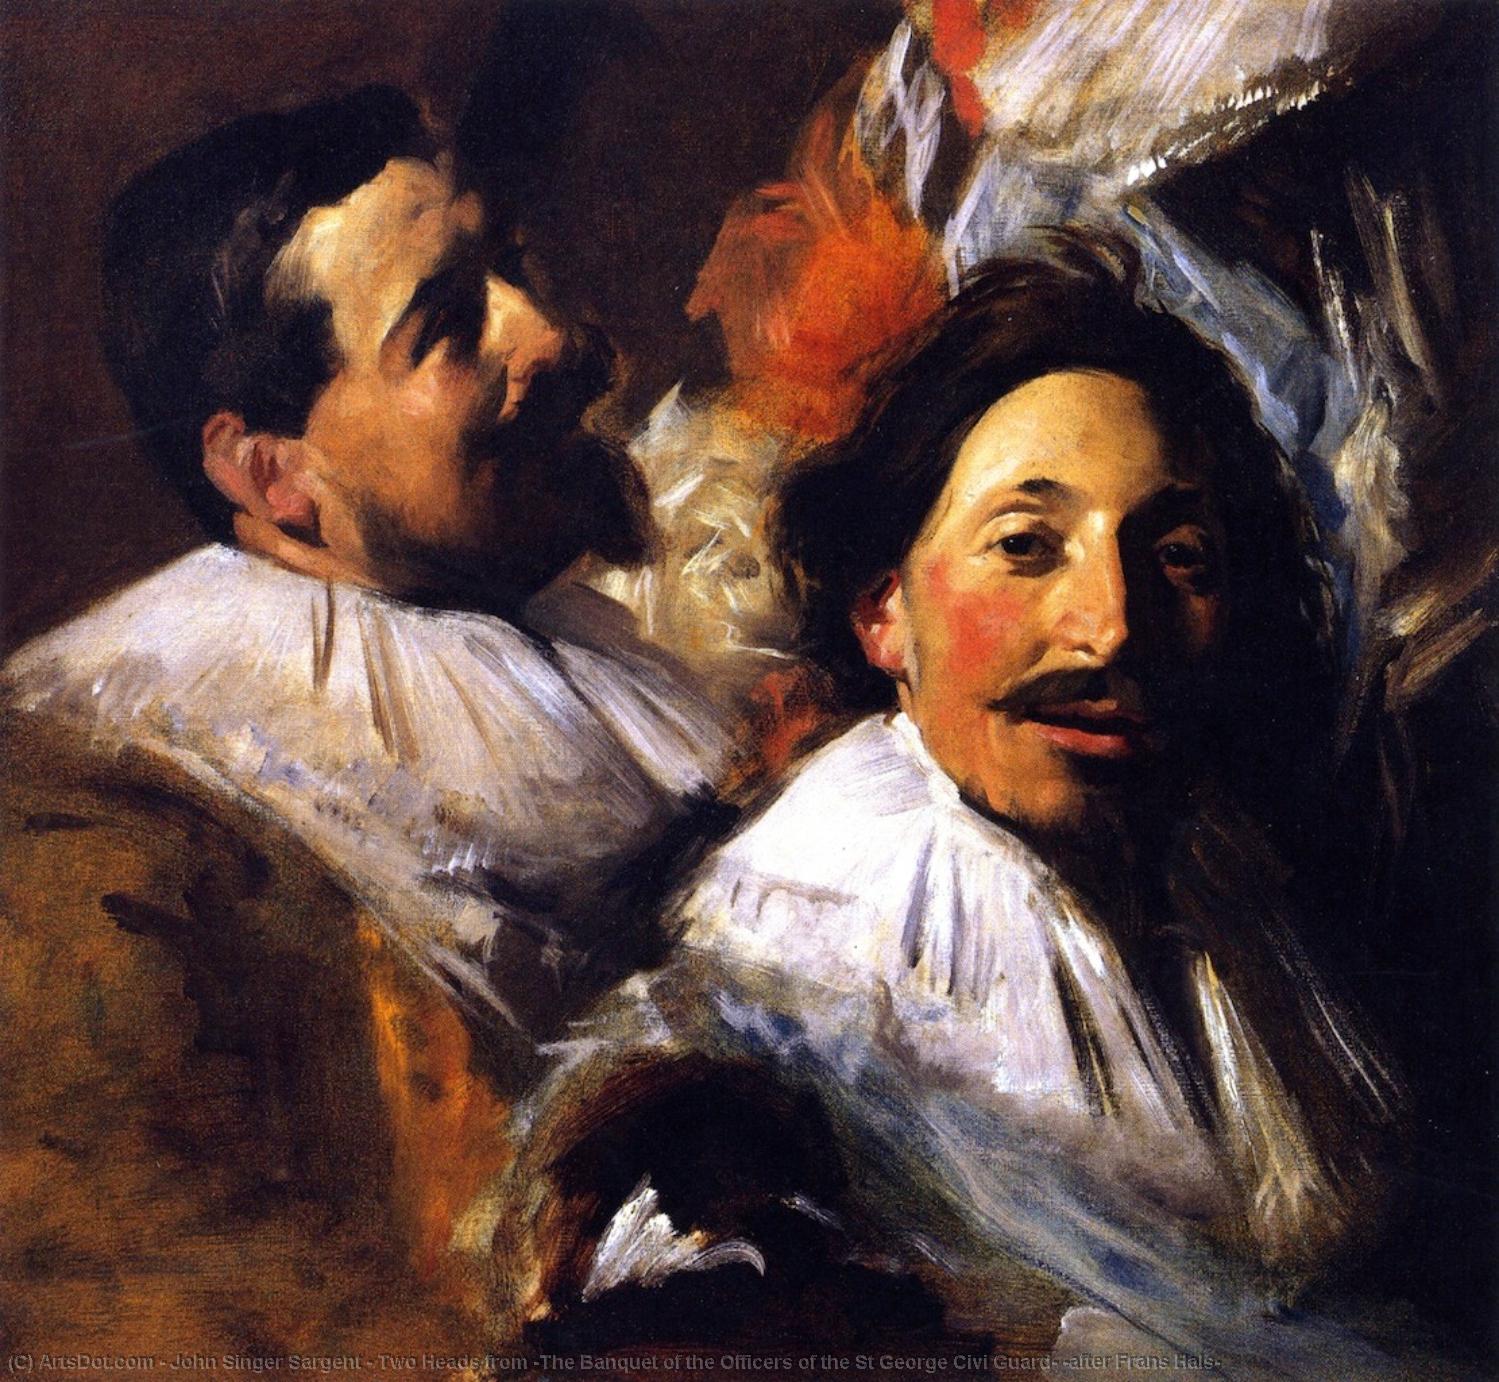 Order Oil Painting Replica Two Heads from `The Banquet of the Officers of the St George Civi Guard` (after Frans Hals), 1880 by John Singer Sargent (1856-1925, Italy) | ArtsDot.com